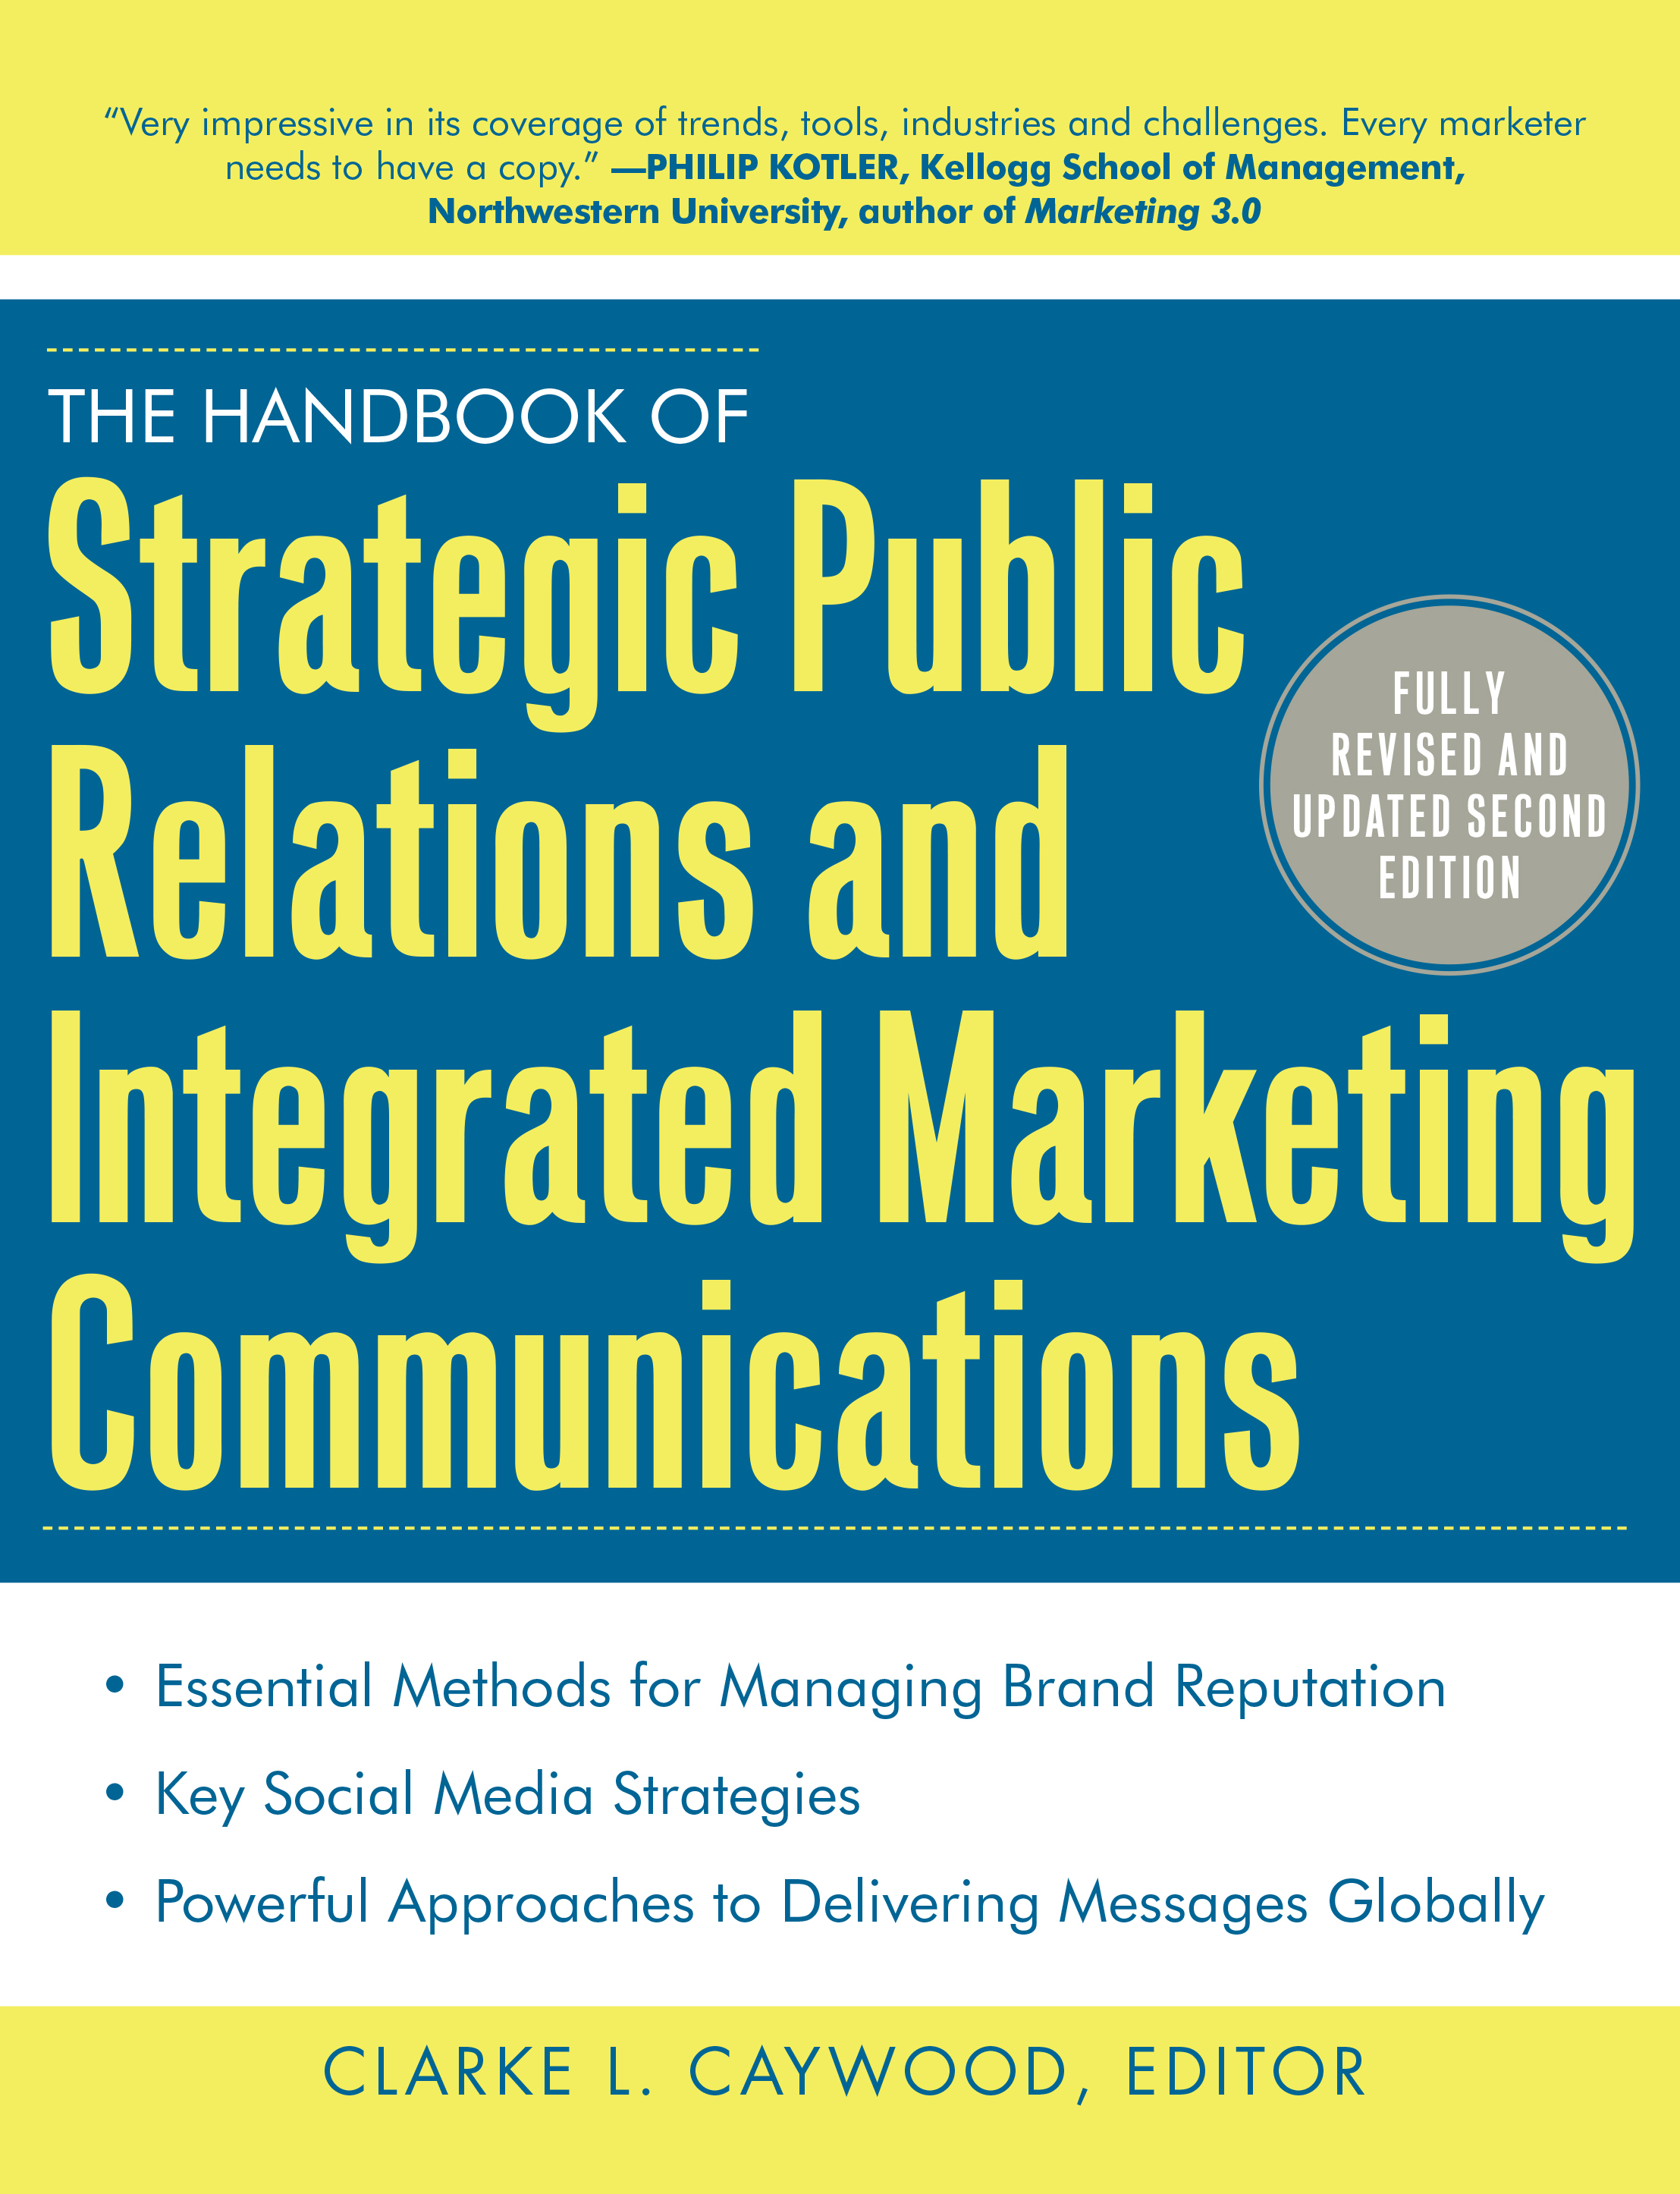 The Handbook of Strategic Public Relations and Integrated Marketing Communications, Second Edition - 50-99.99